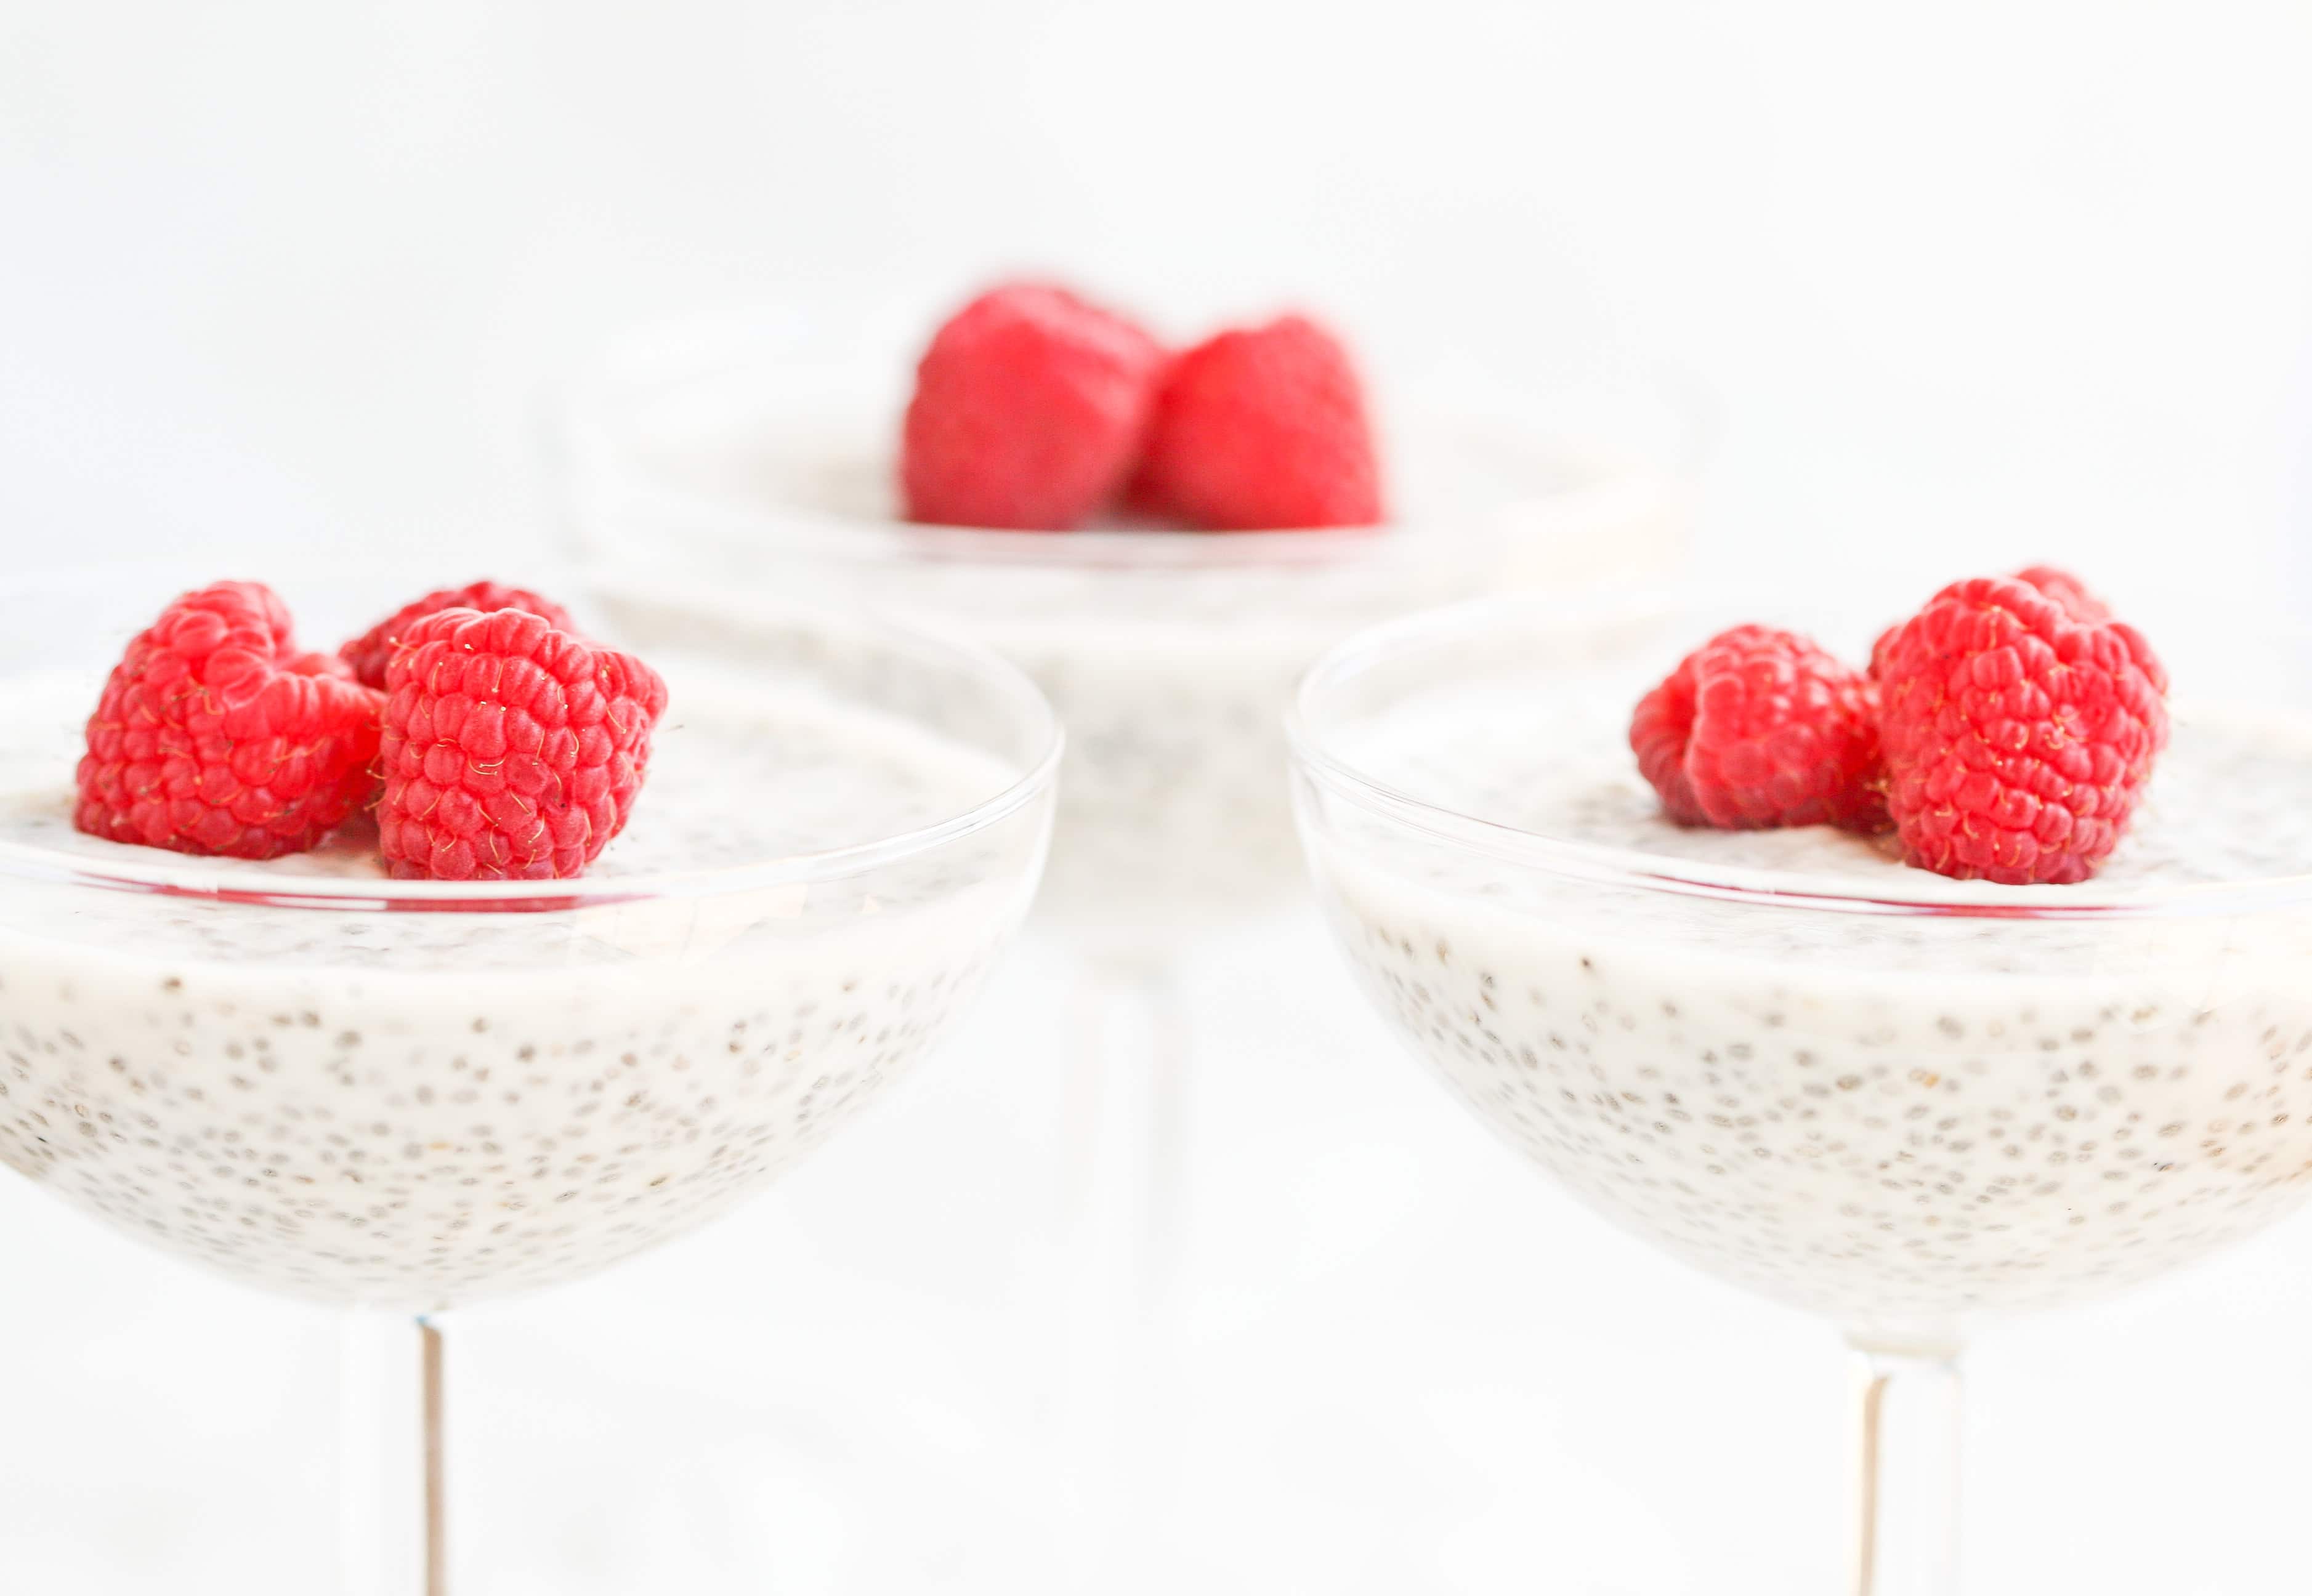 How To Make Chia Seed Pudding - Eat With Clarity